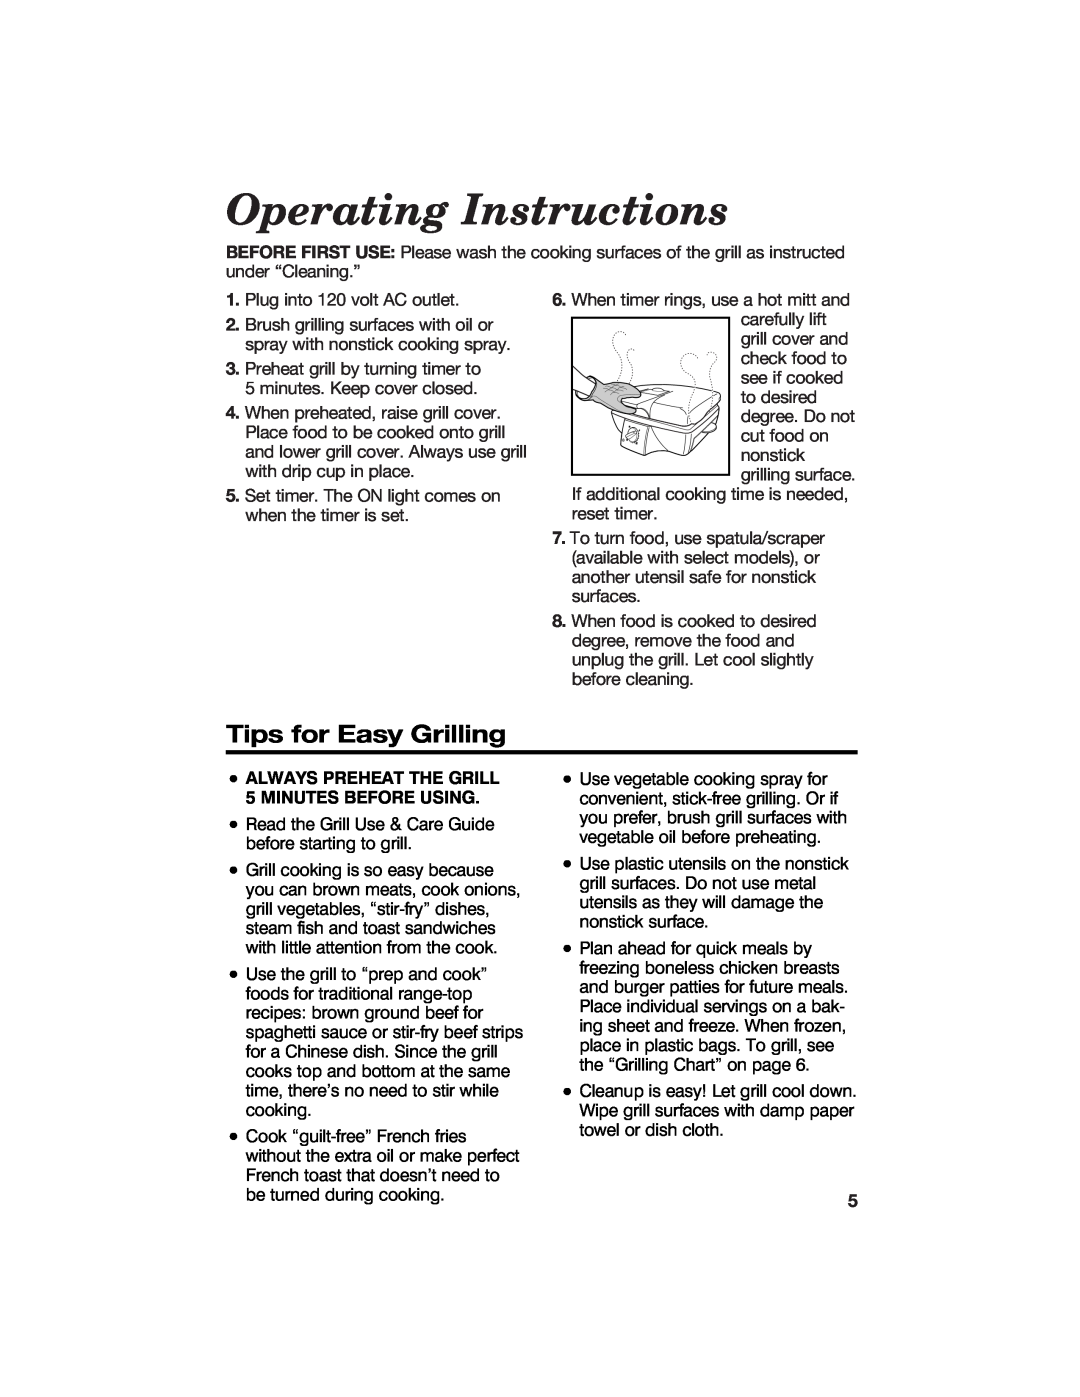 Hamilton Beach 840100500 manual Operating Instructions, Tips for Easy Grilling 